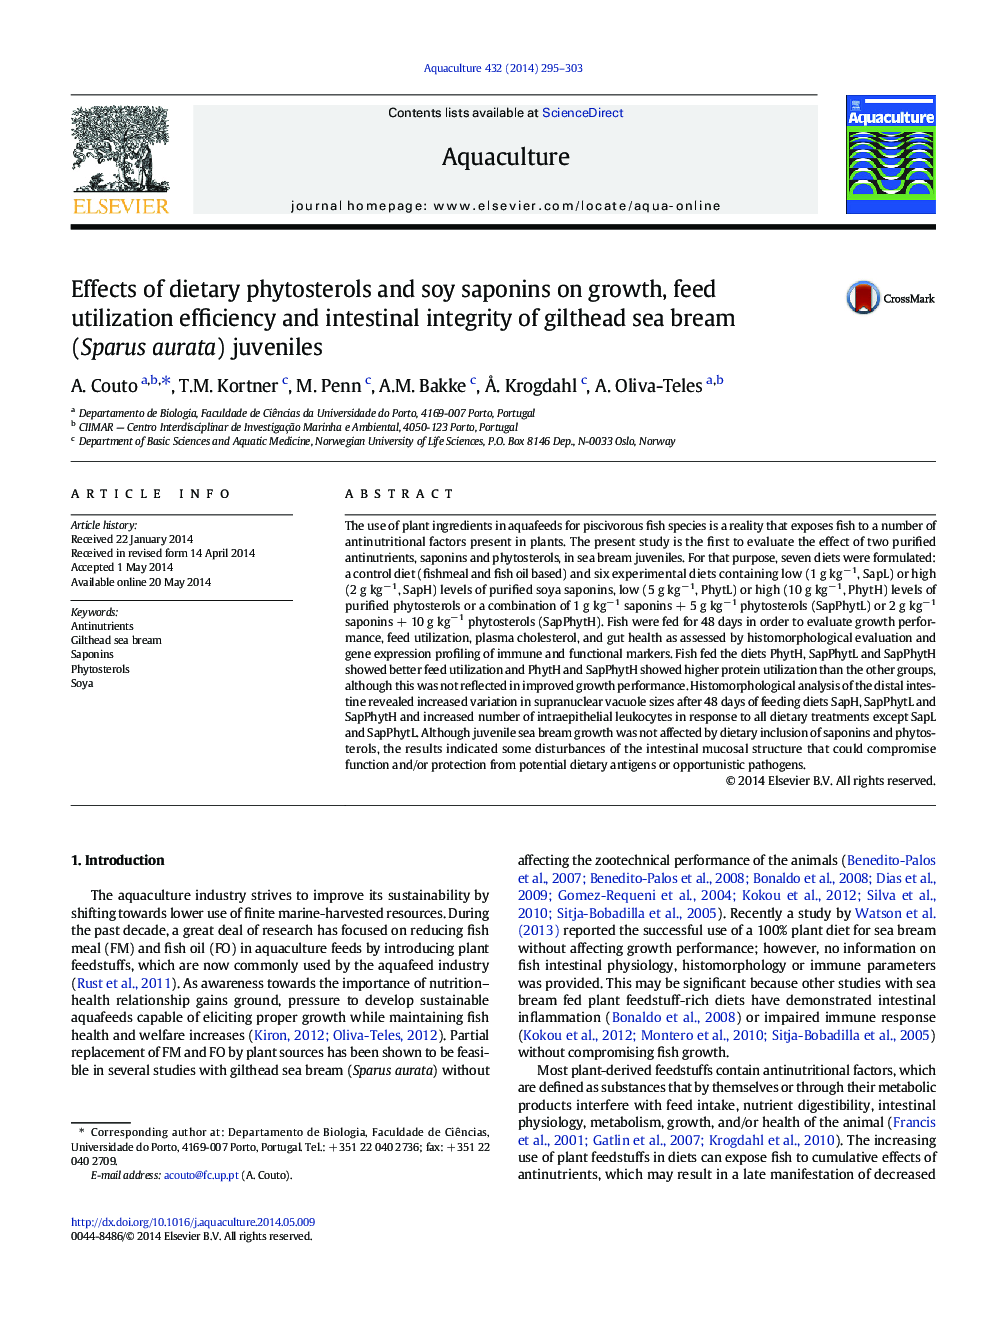 Effects of dietary phytosterols and soy saponins on growth, feed utilization efficiency and intestinal integrity of gilthead sea bream (Sparus aurata) juveniles